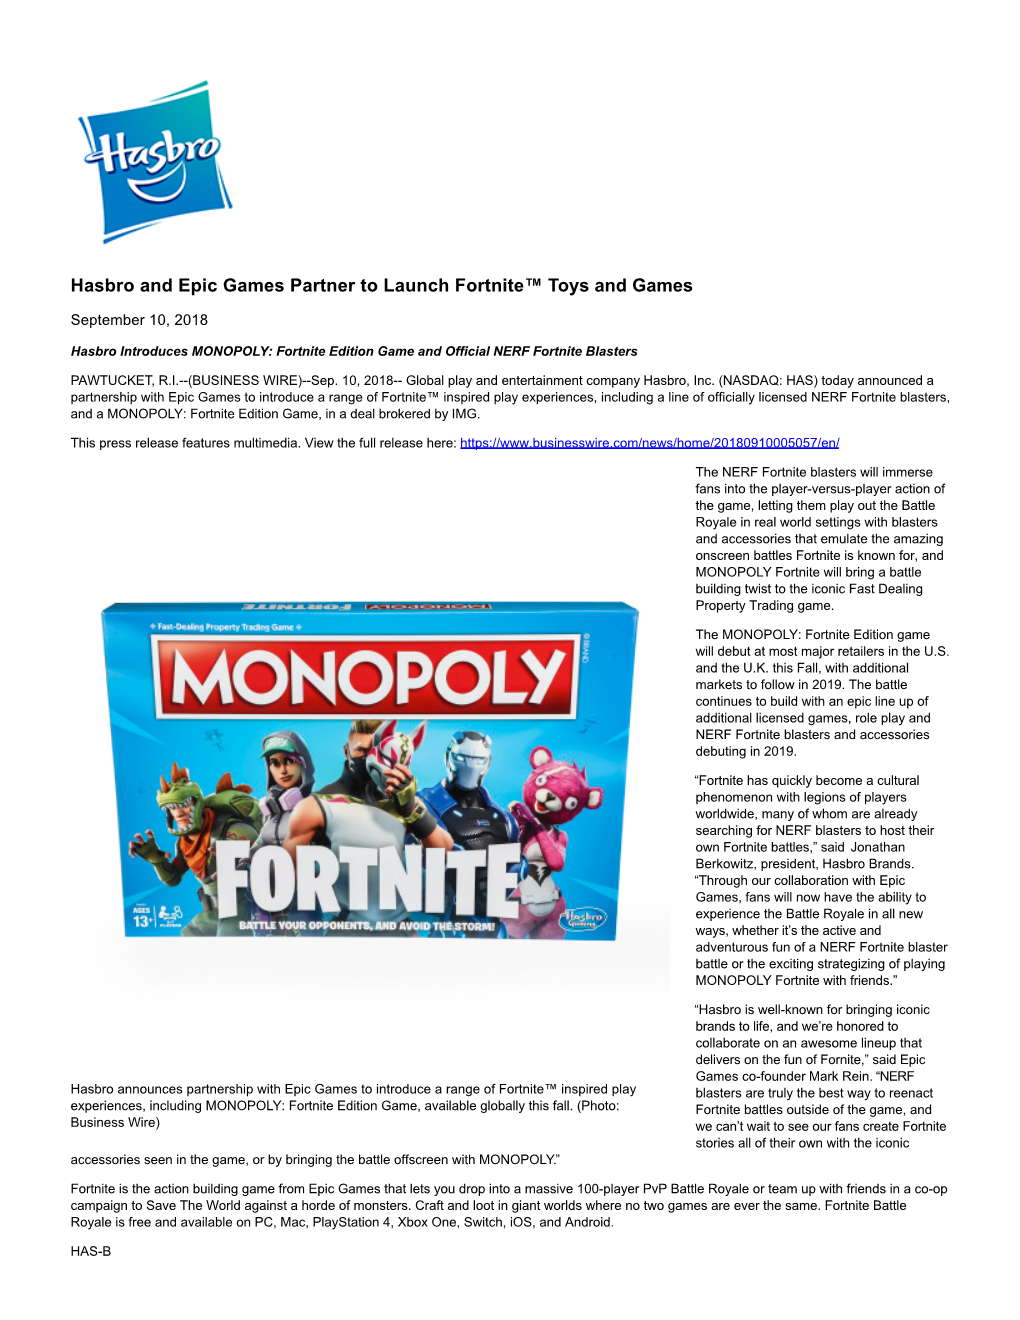 Hasbro and Epic Games Partner to Launch Fortnite™ Toys and Games